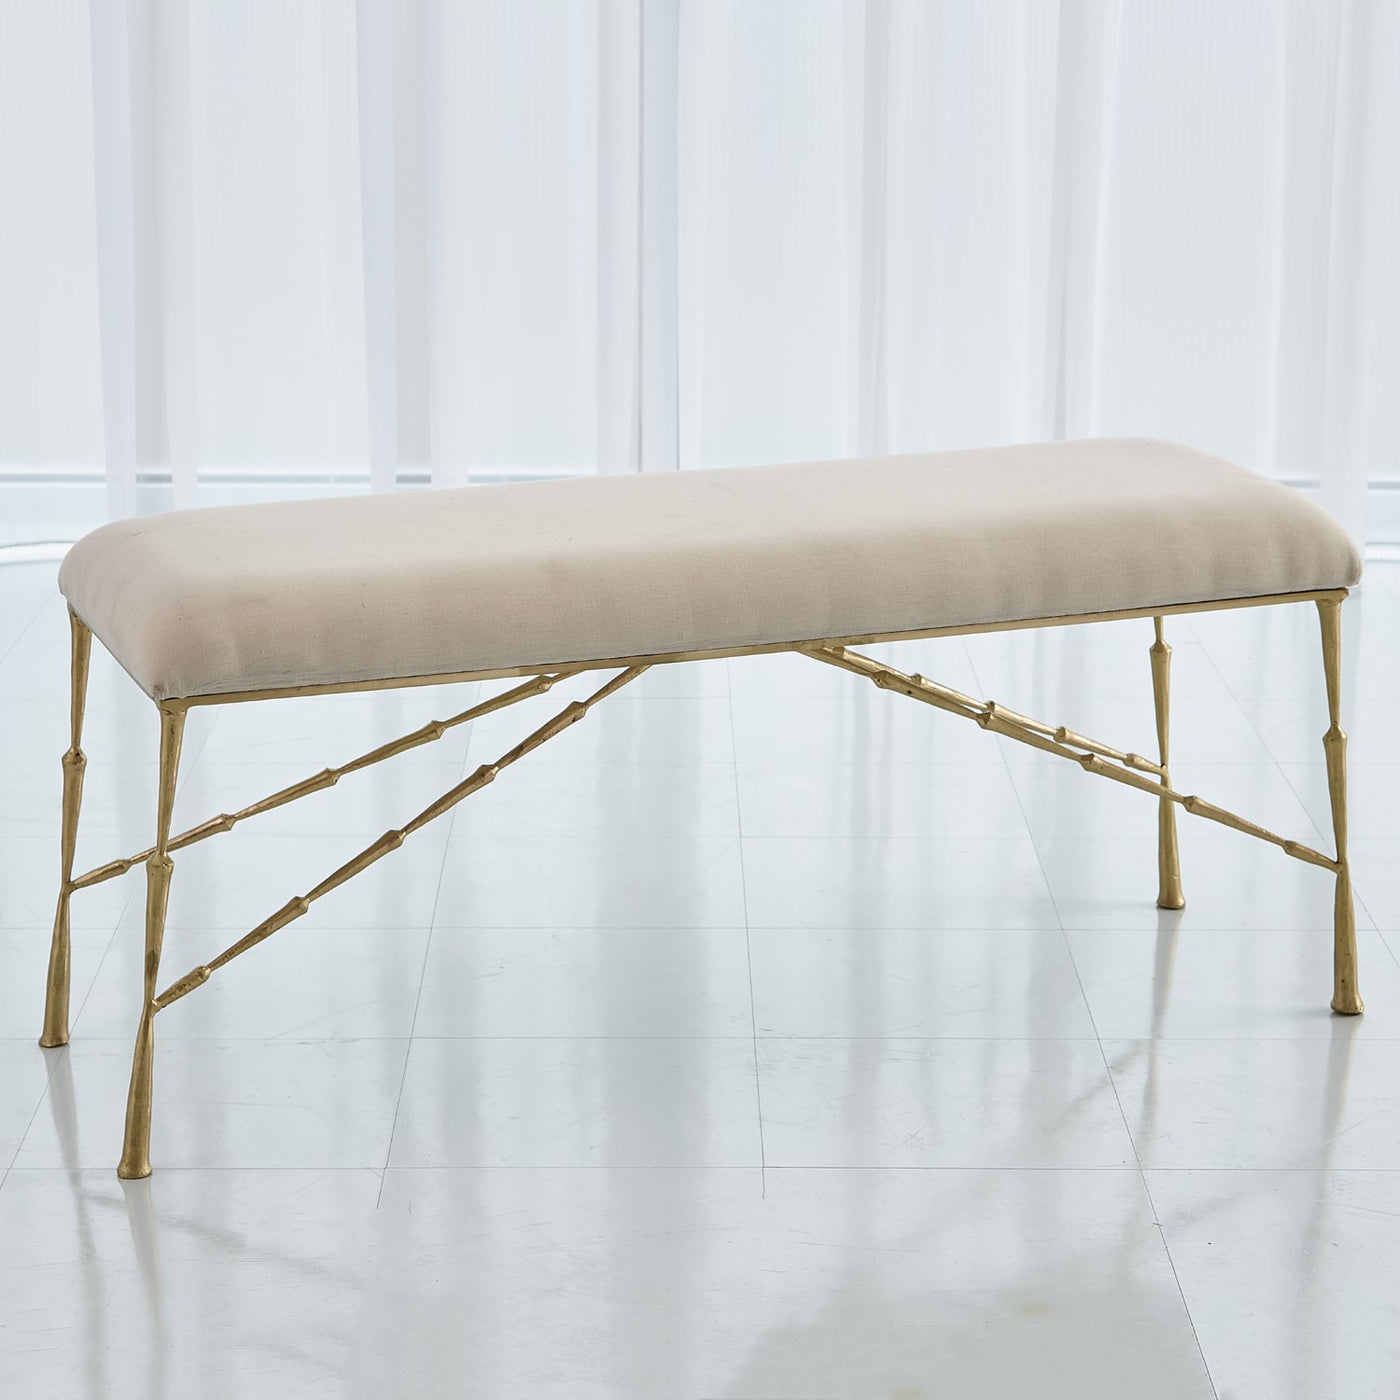 BENCH ANTIQUE BRASS LARGE